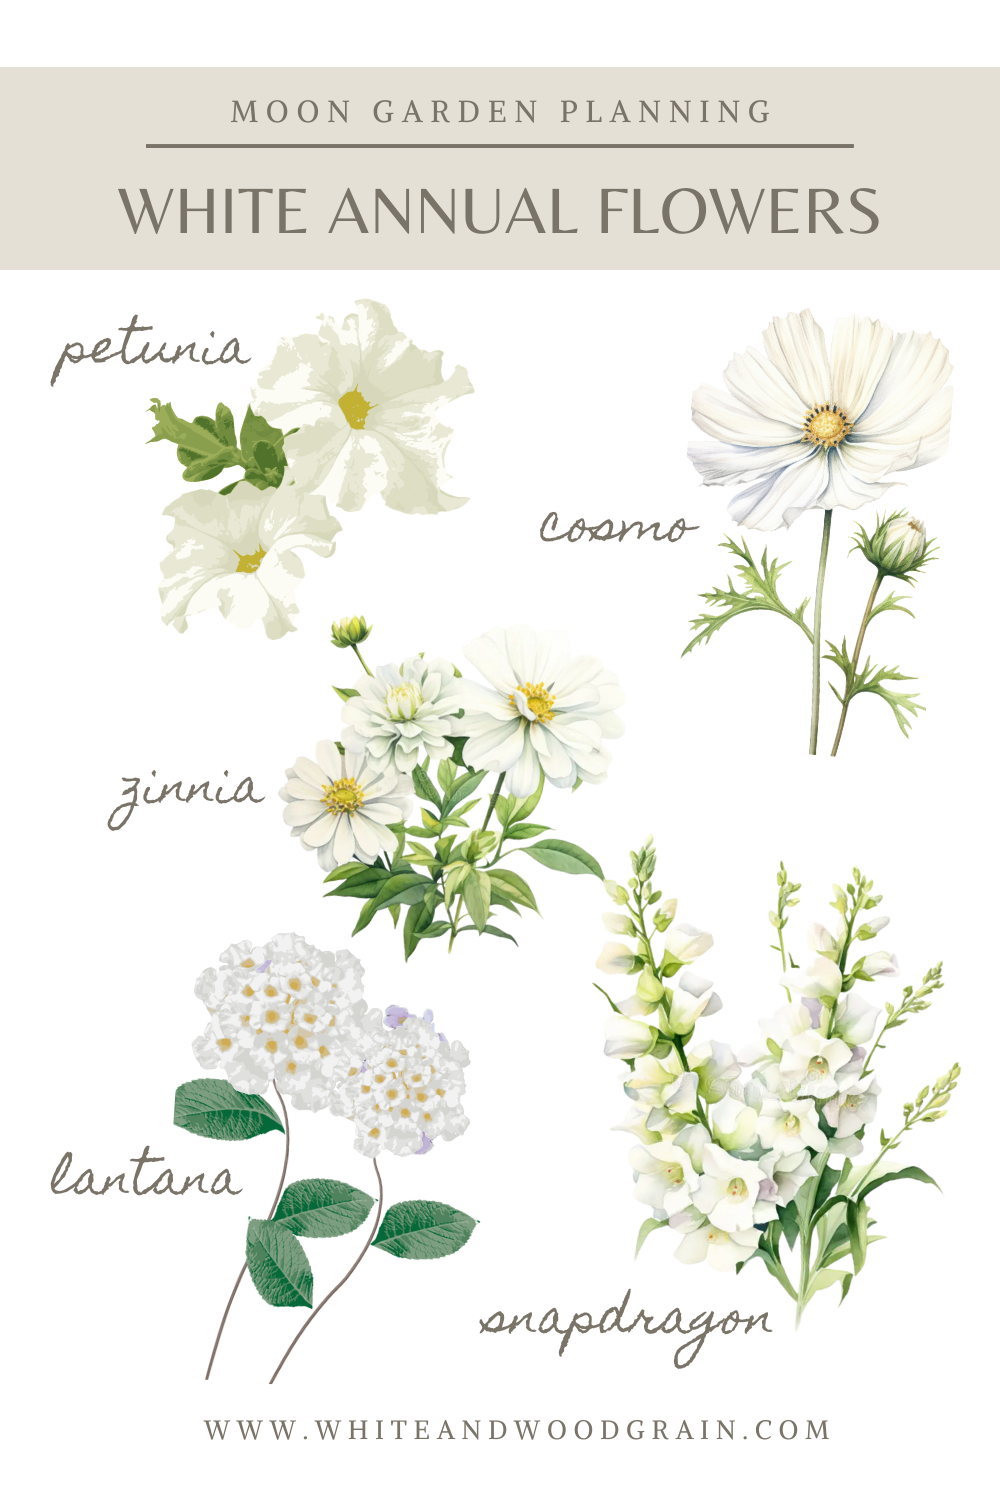 white annual flowers to consider when planning a moon garden - petunia, cosmo, zinnia, lantana, and spapdragon, 